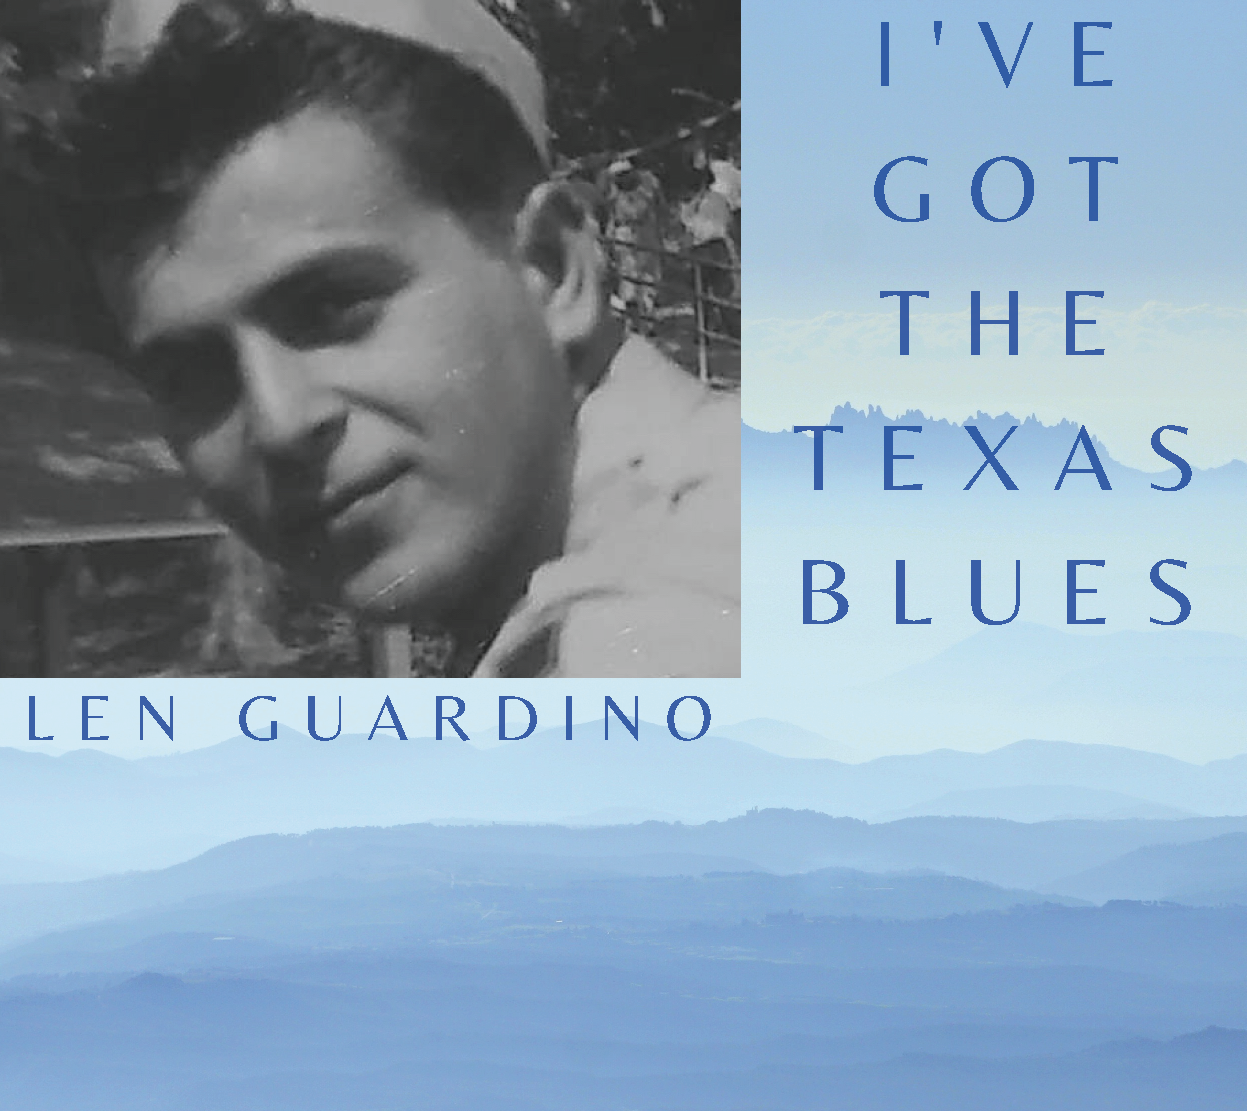 Rejuvenating Young Hearts and Minds: Len Guardino aka Champagne Cat® Releases Awe-Inspiring Country Music Album